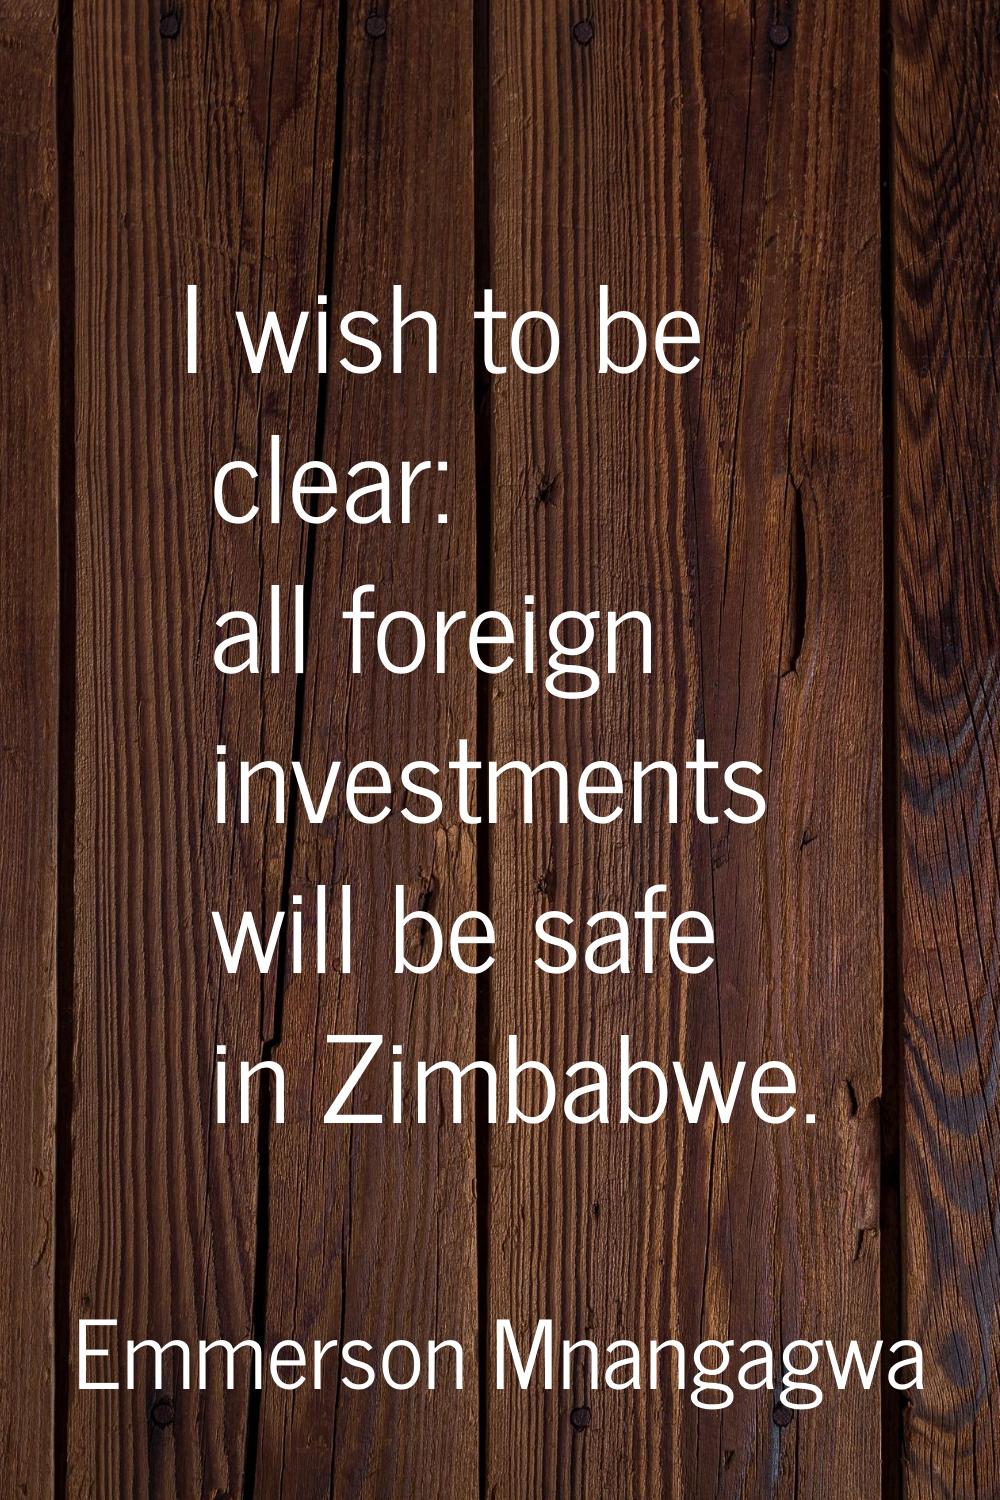 I wish to be clear: all foreign investments will be safe in Zimbabwe.